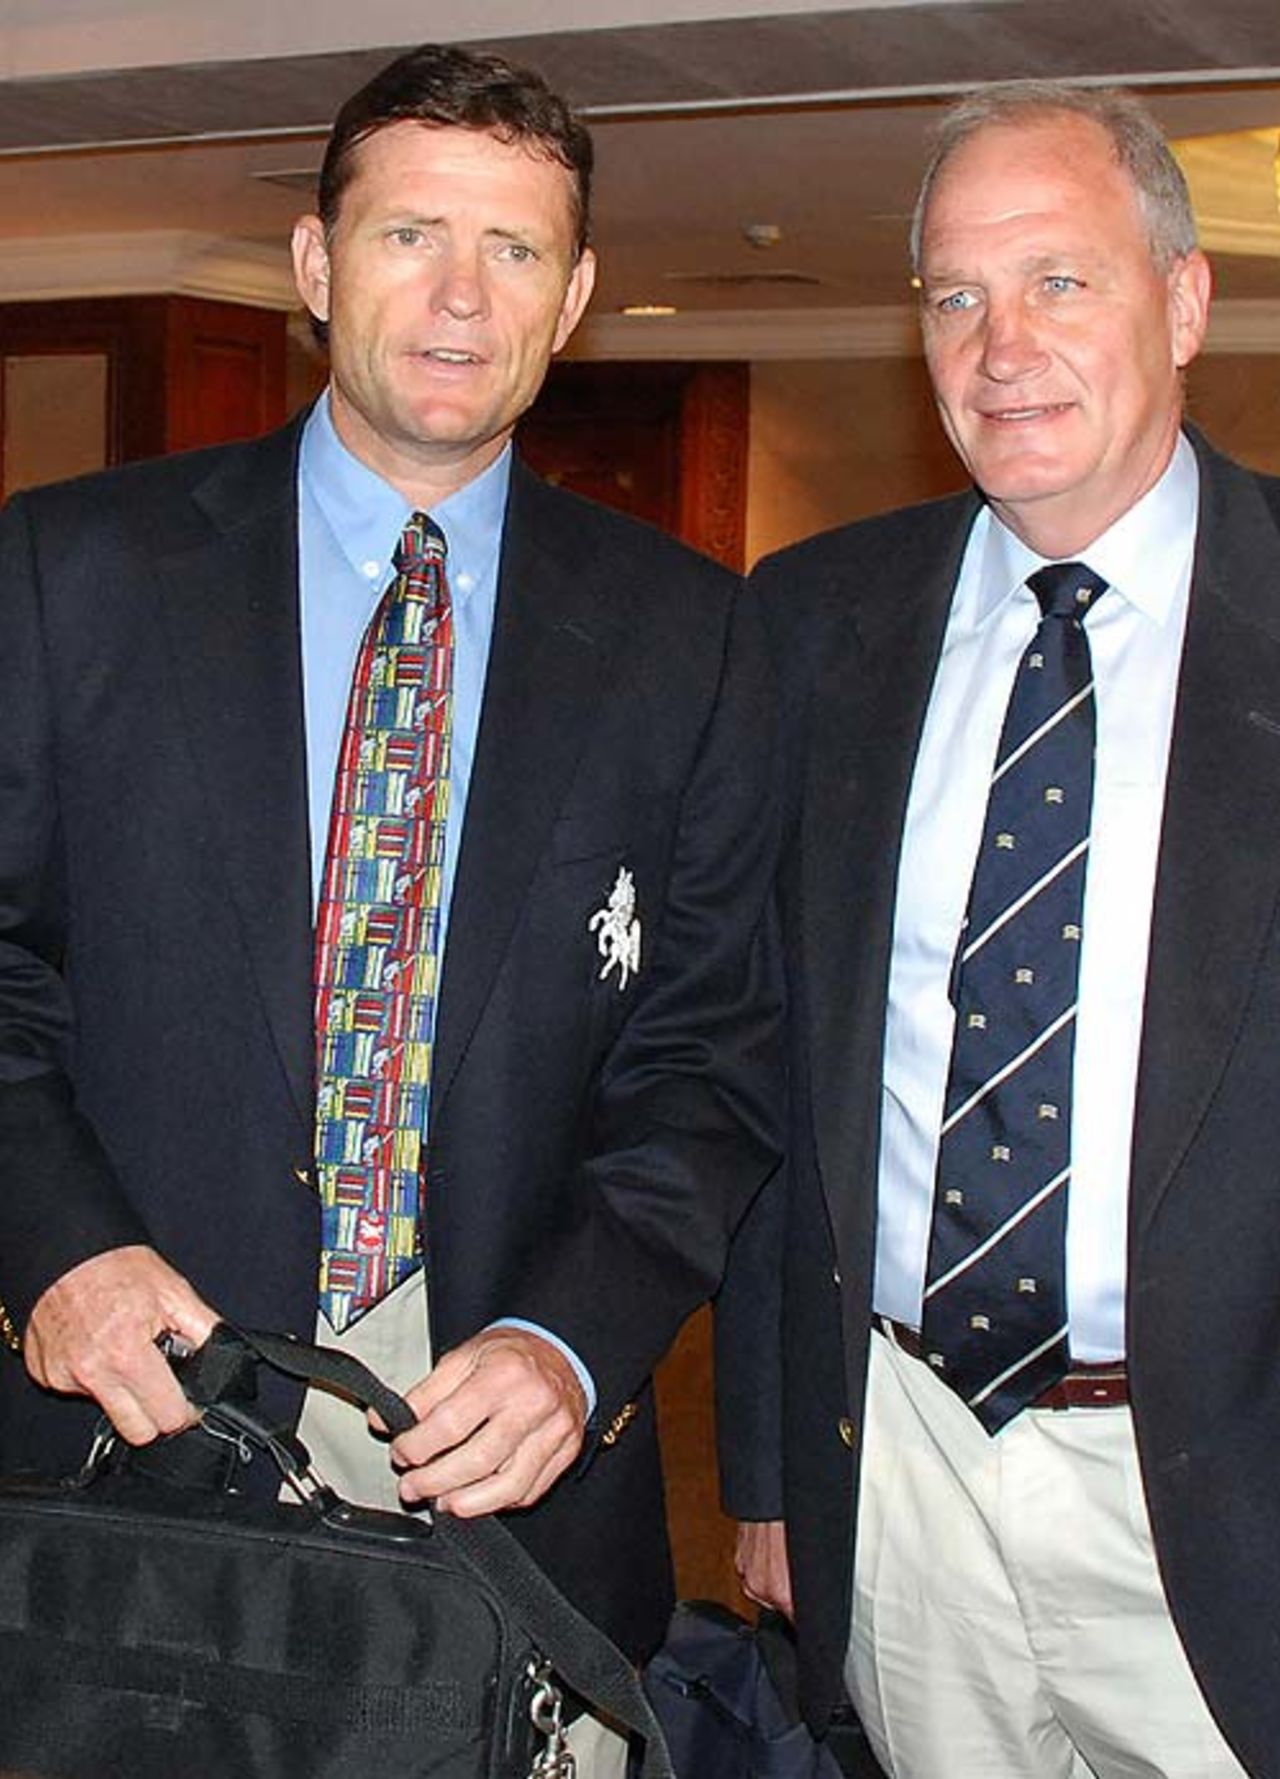 Graham Ford and John Emburey arrive in Chennai to stake their claim to be the new coach of the Indian team, Chennai, June 9, 2006.